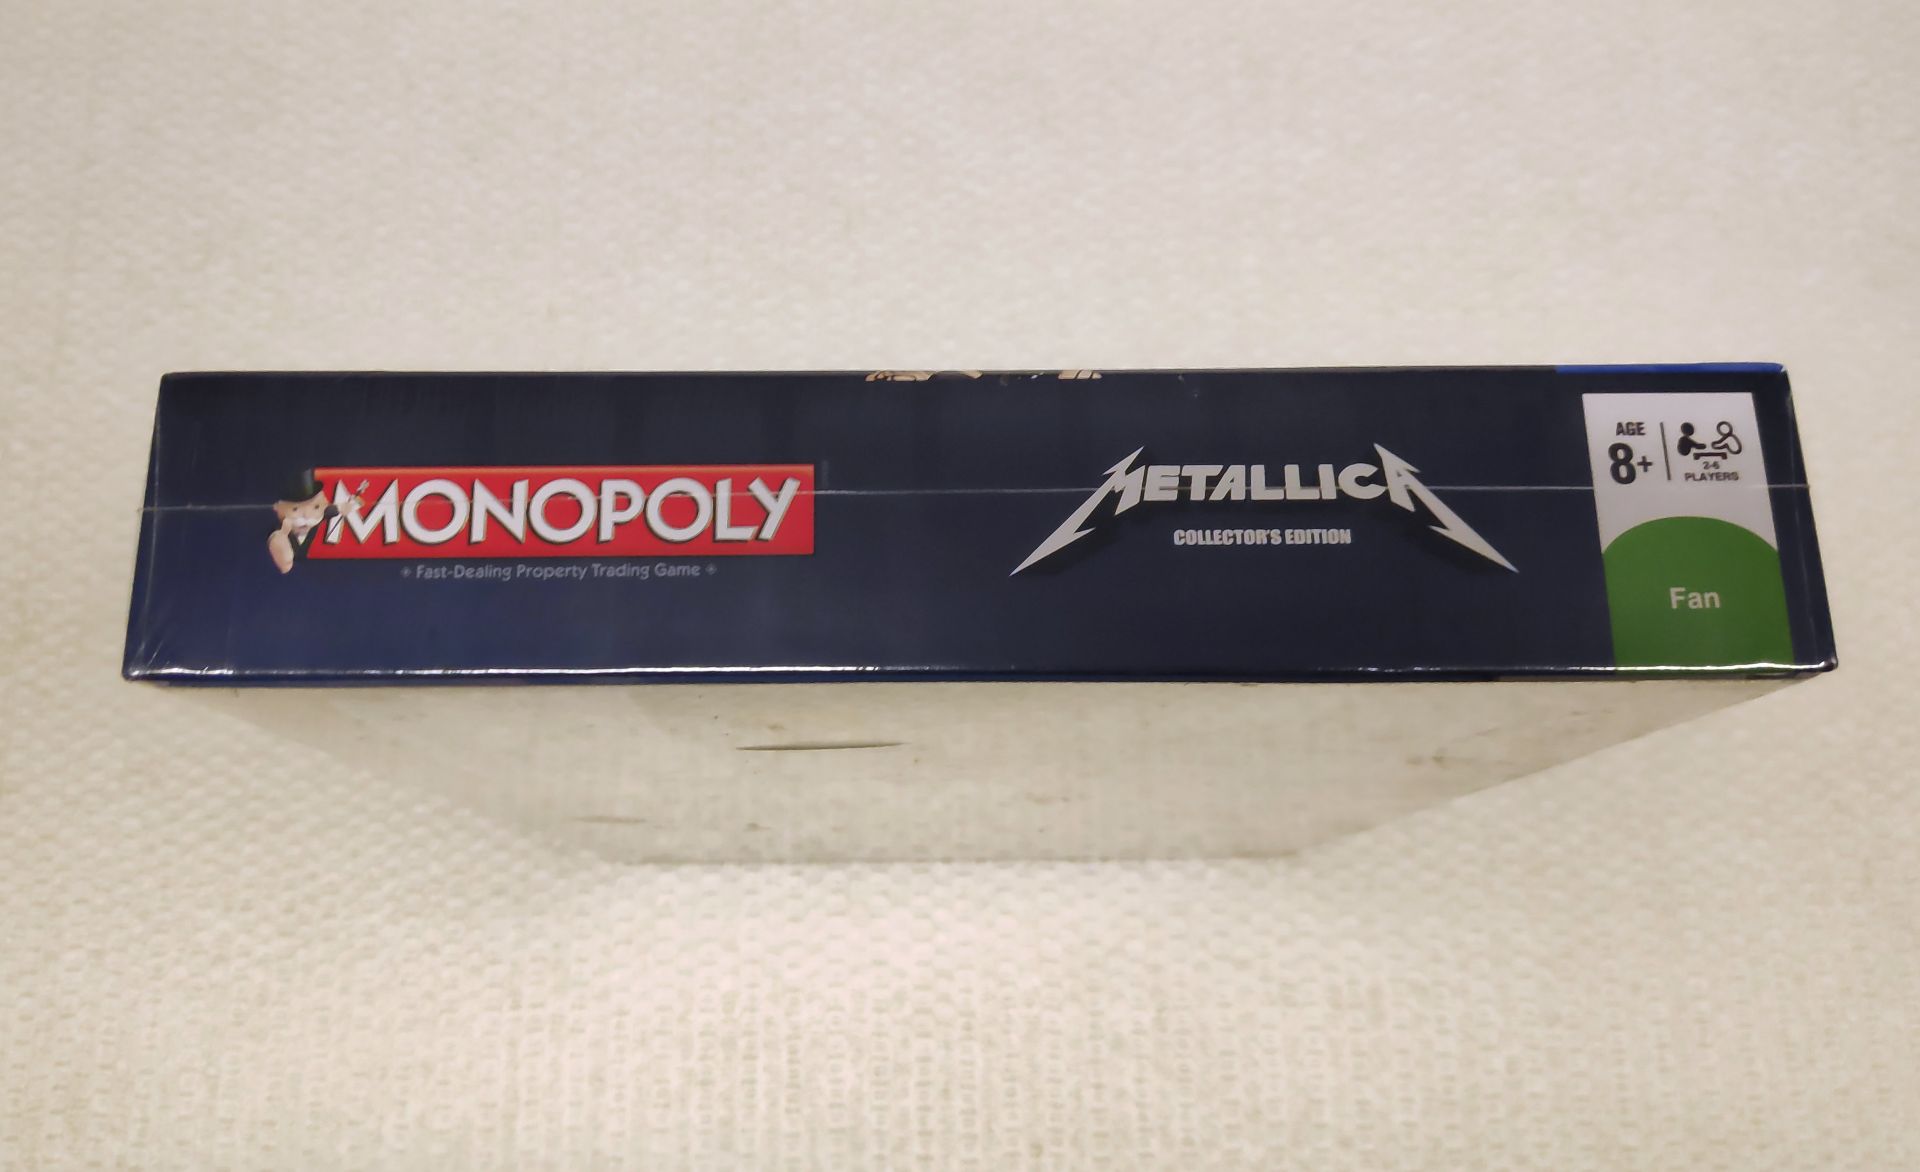 1 x Metallica Collector's Edition Monopoly - New/Sealed - Image 5 of 8